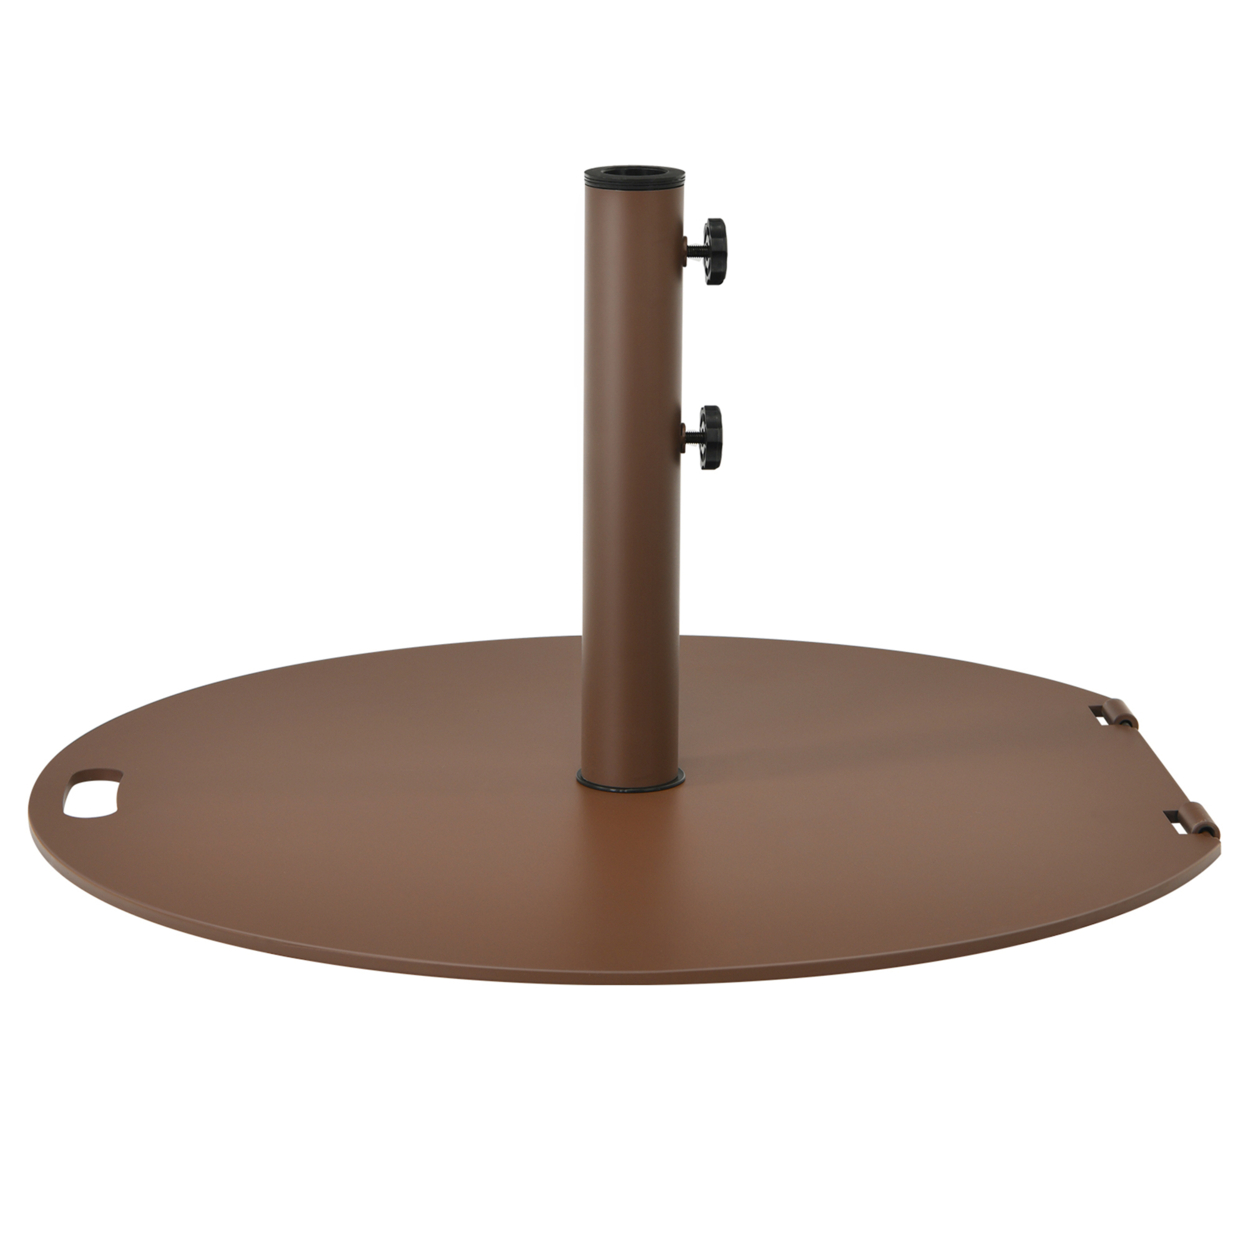 Round Weighted Patio Umbrella Base Stand 50 Lbs W/ 3 Adapters Brown